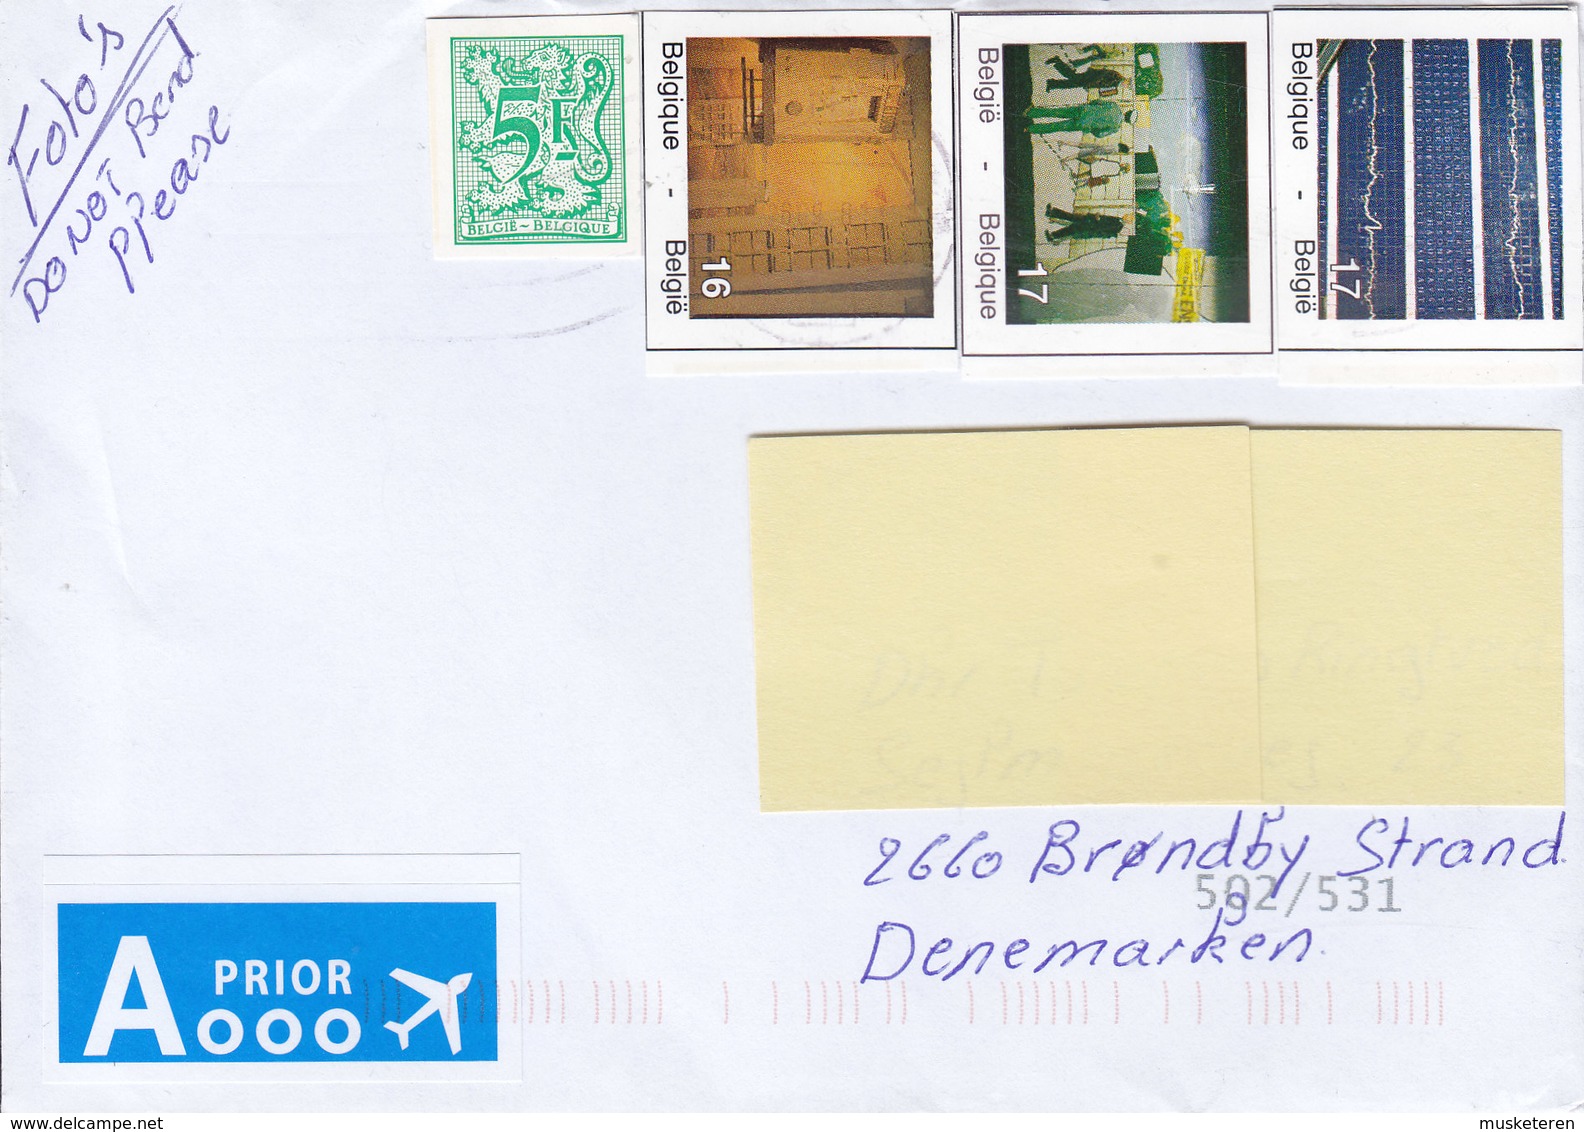 Belgium A PRIOR Avion Label 20?? Cover Lettre BRØNDBY STRAND Denmark 4x Imperf Cutouts From Stationery Ganzsache Entier? - Storia Postale